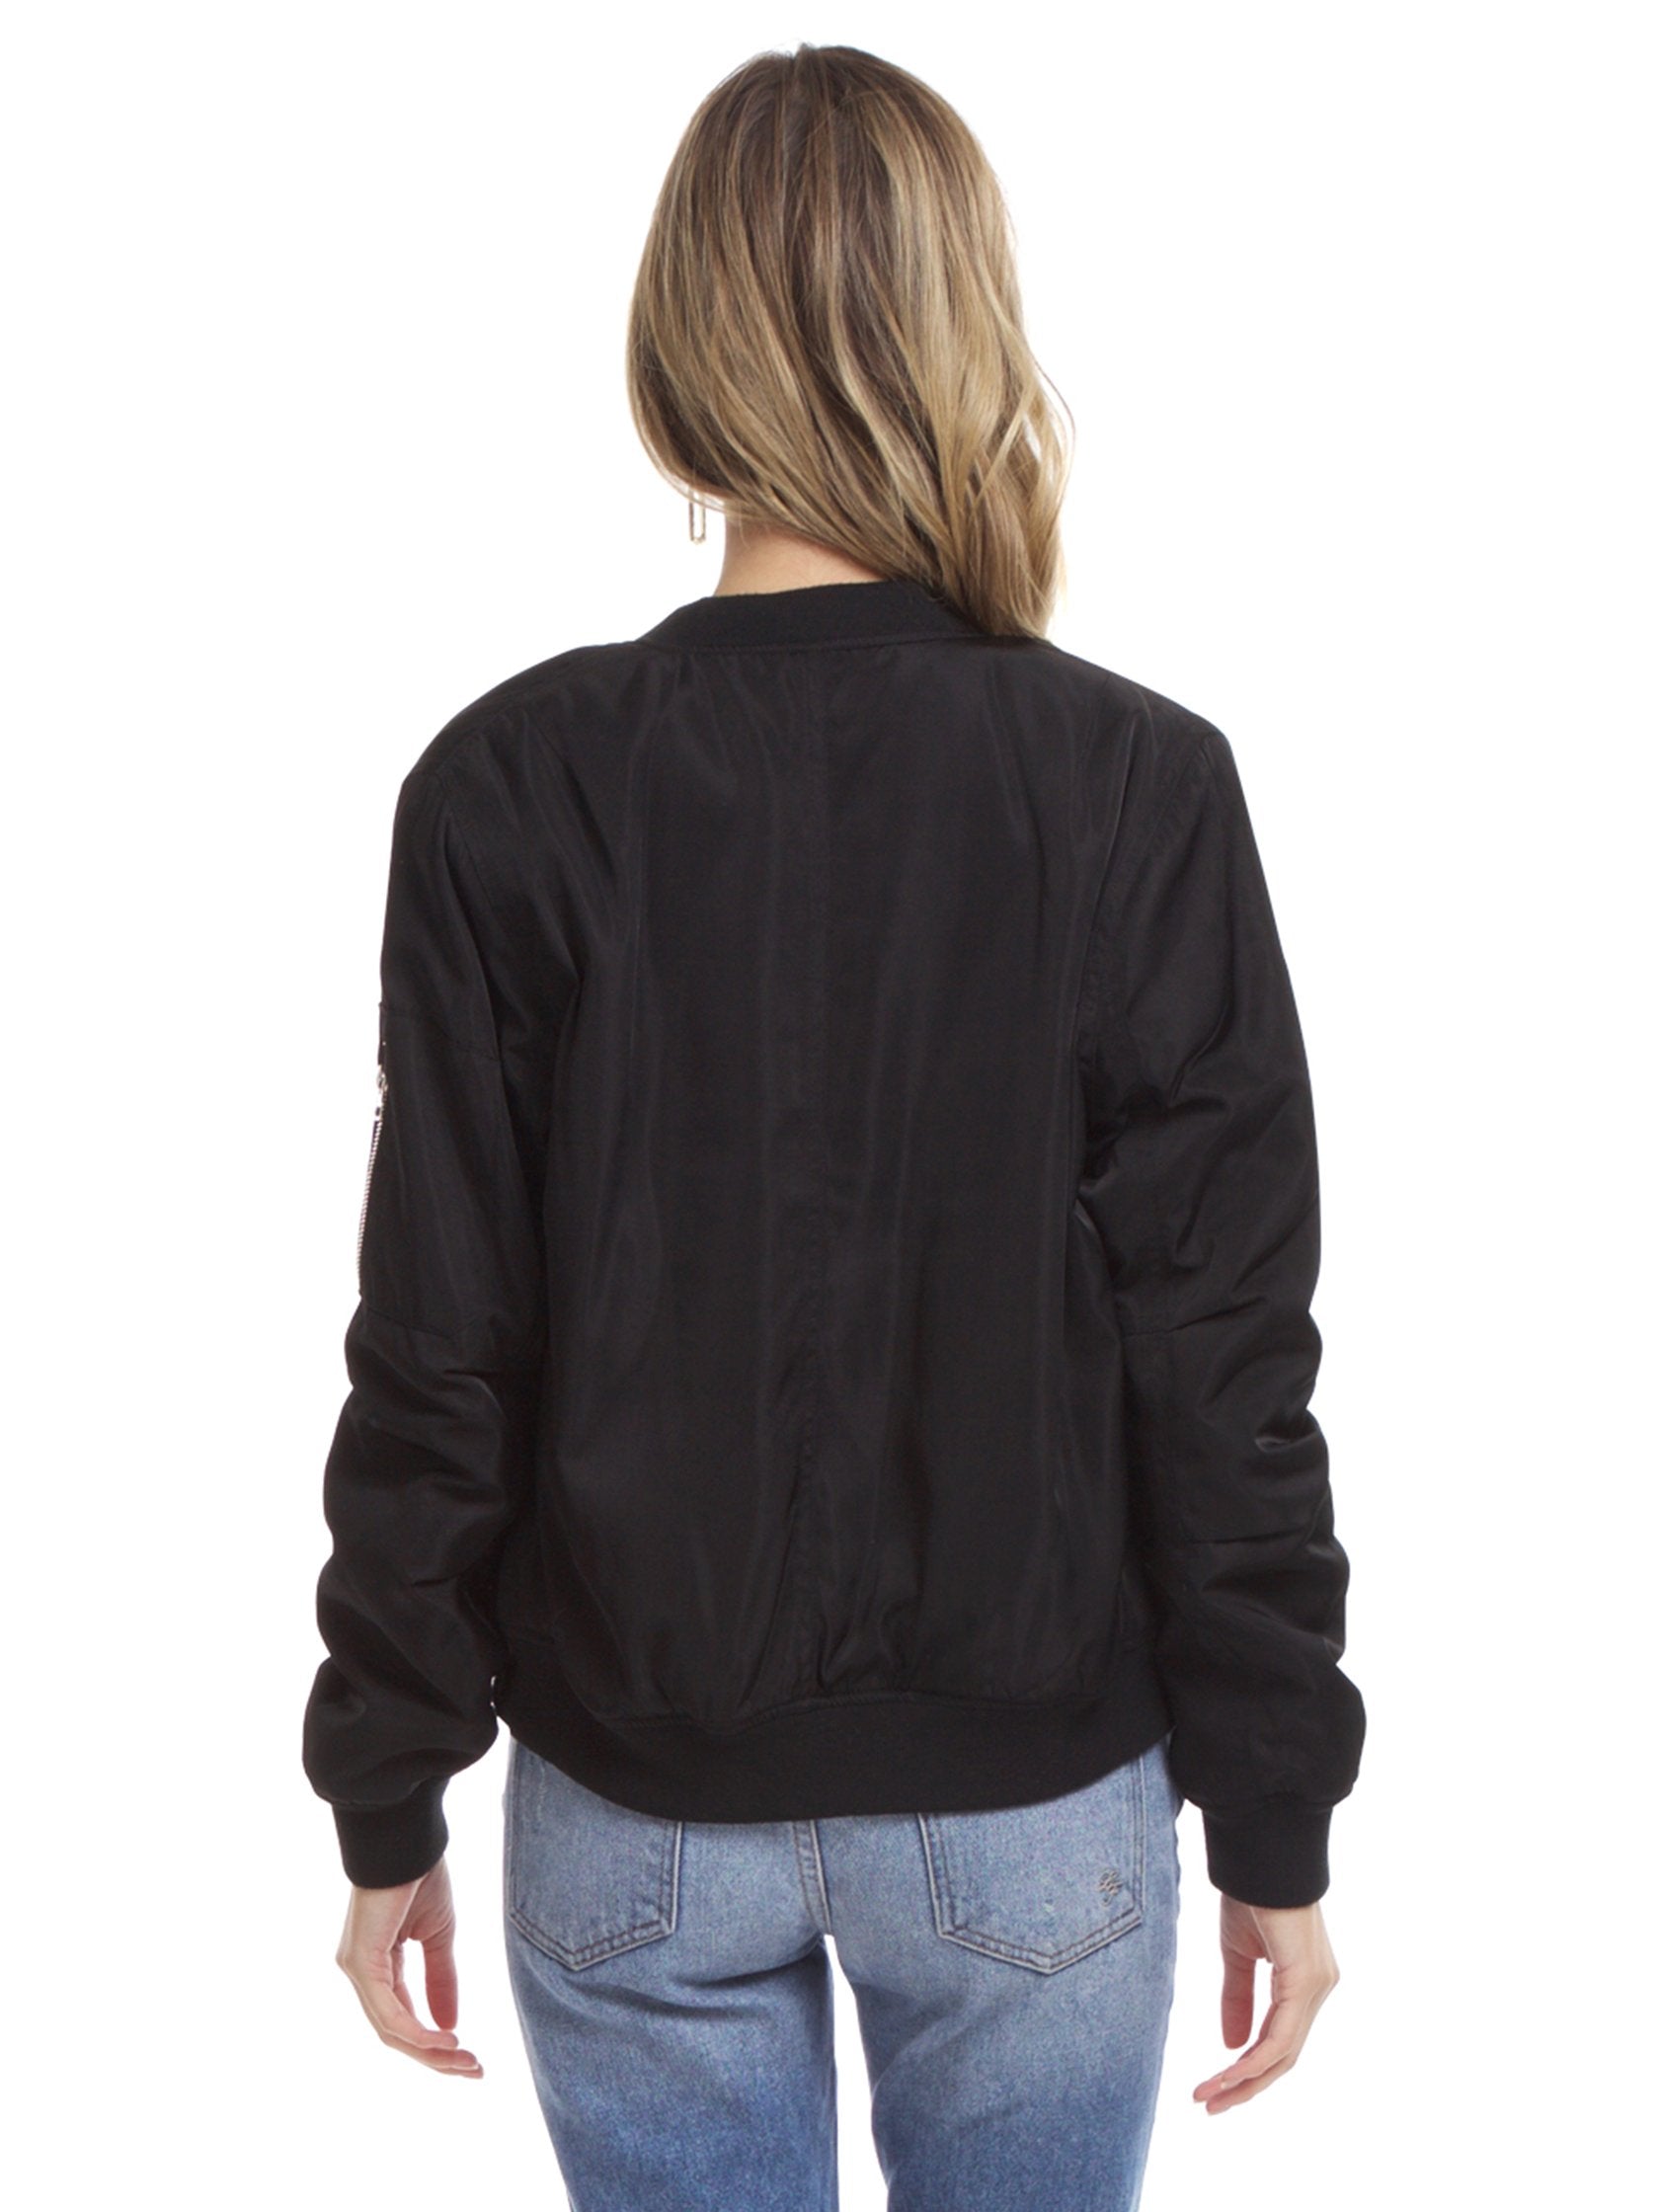 Women outfit in a jacket rental from Lush called Zip Up Bomber Jacket